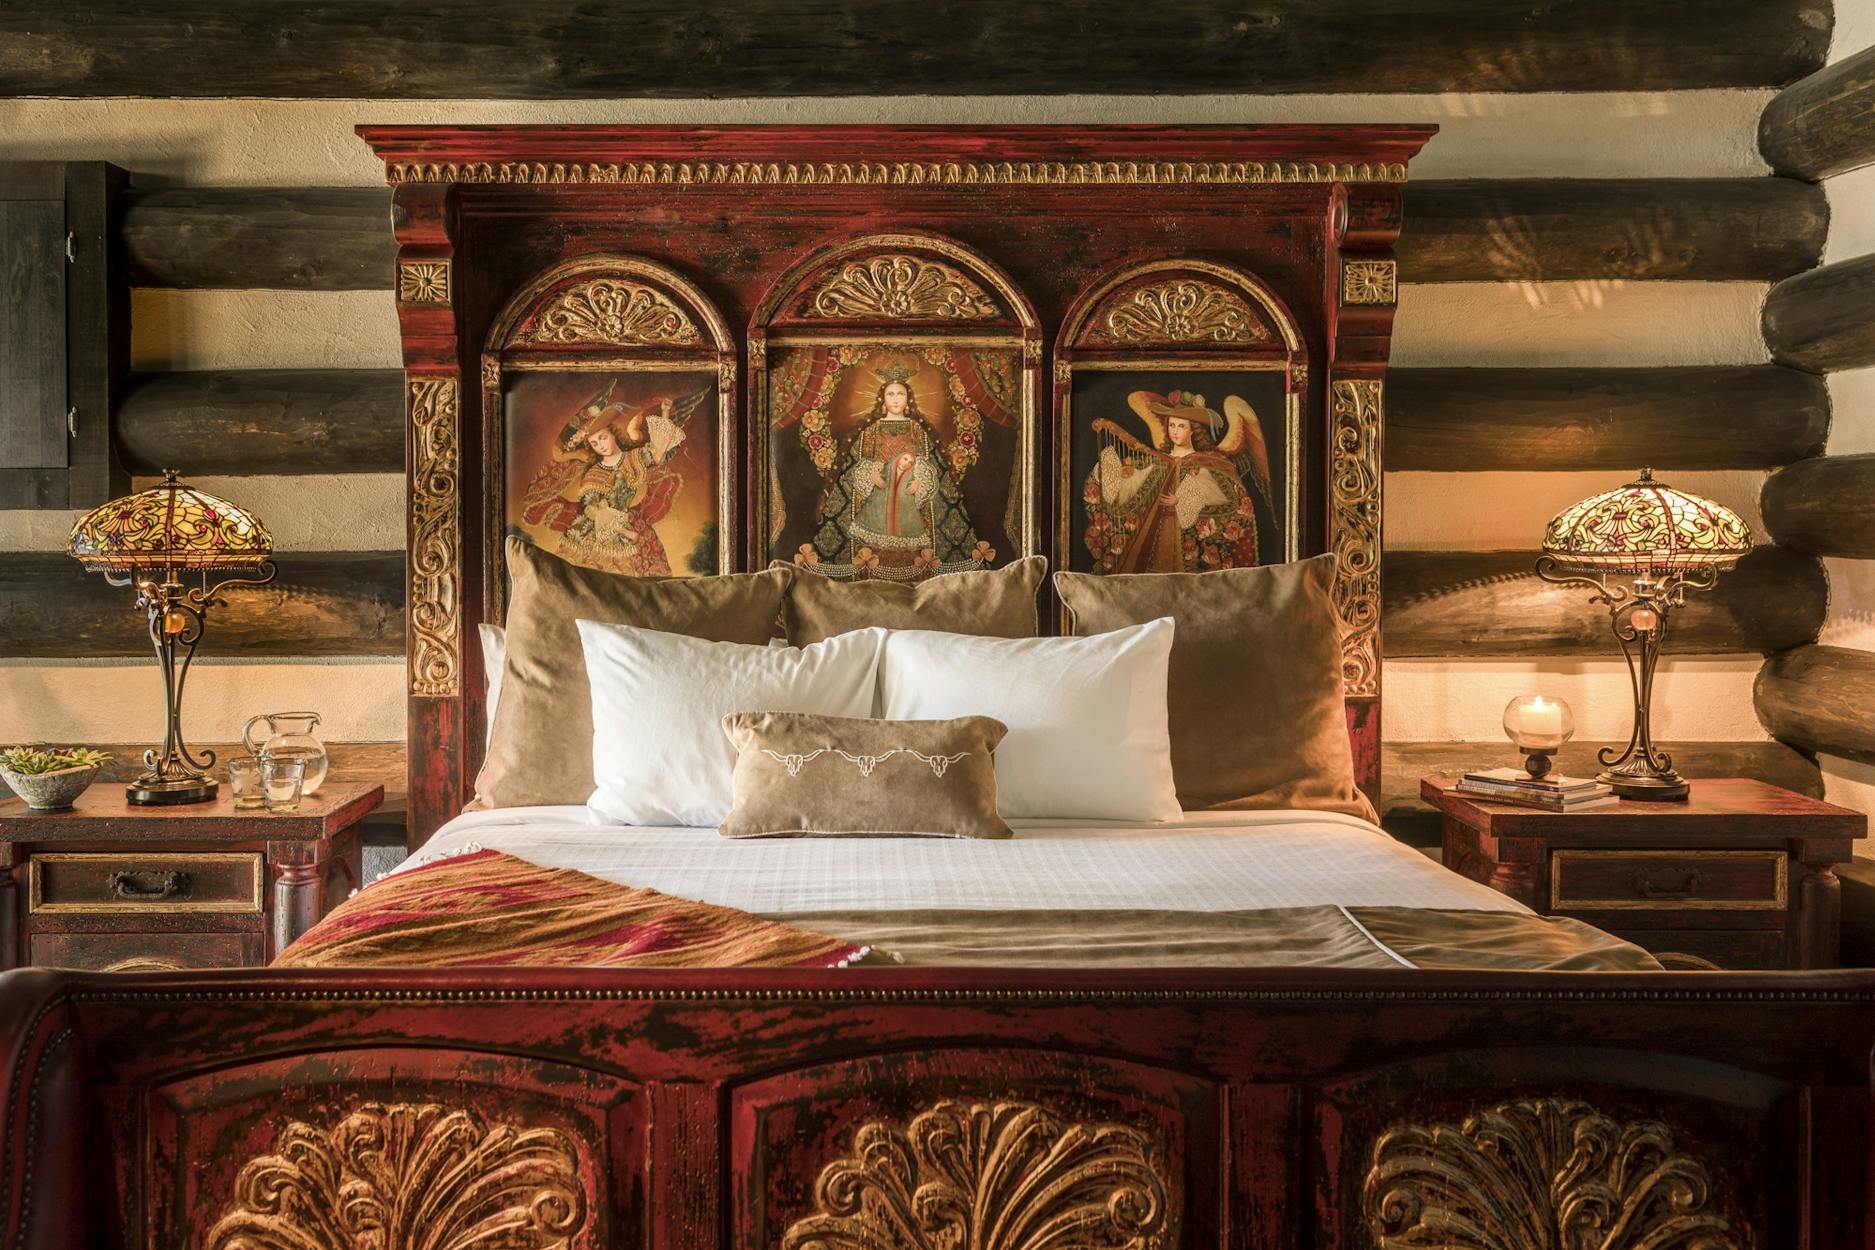 Suite Dreams A Look Inside Some Decadent Hotel Rooms Texas Monthly